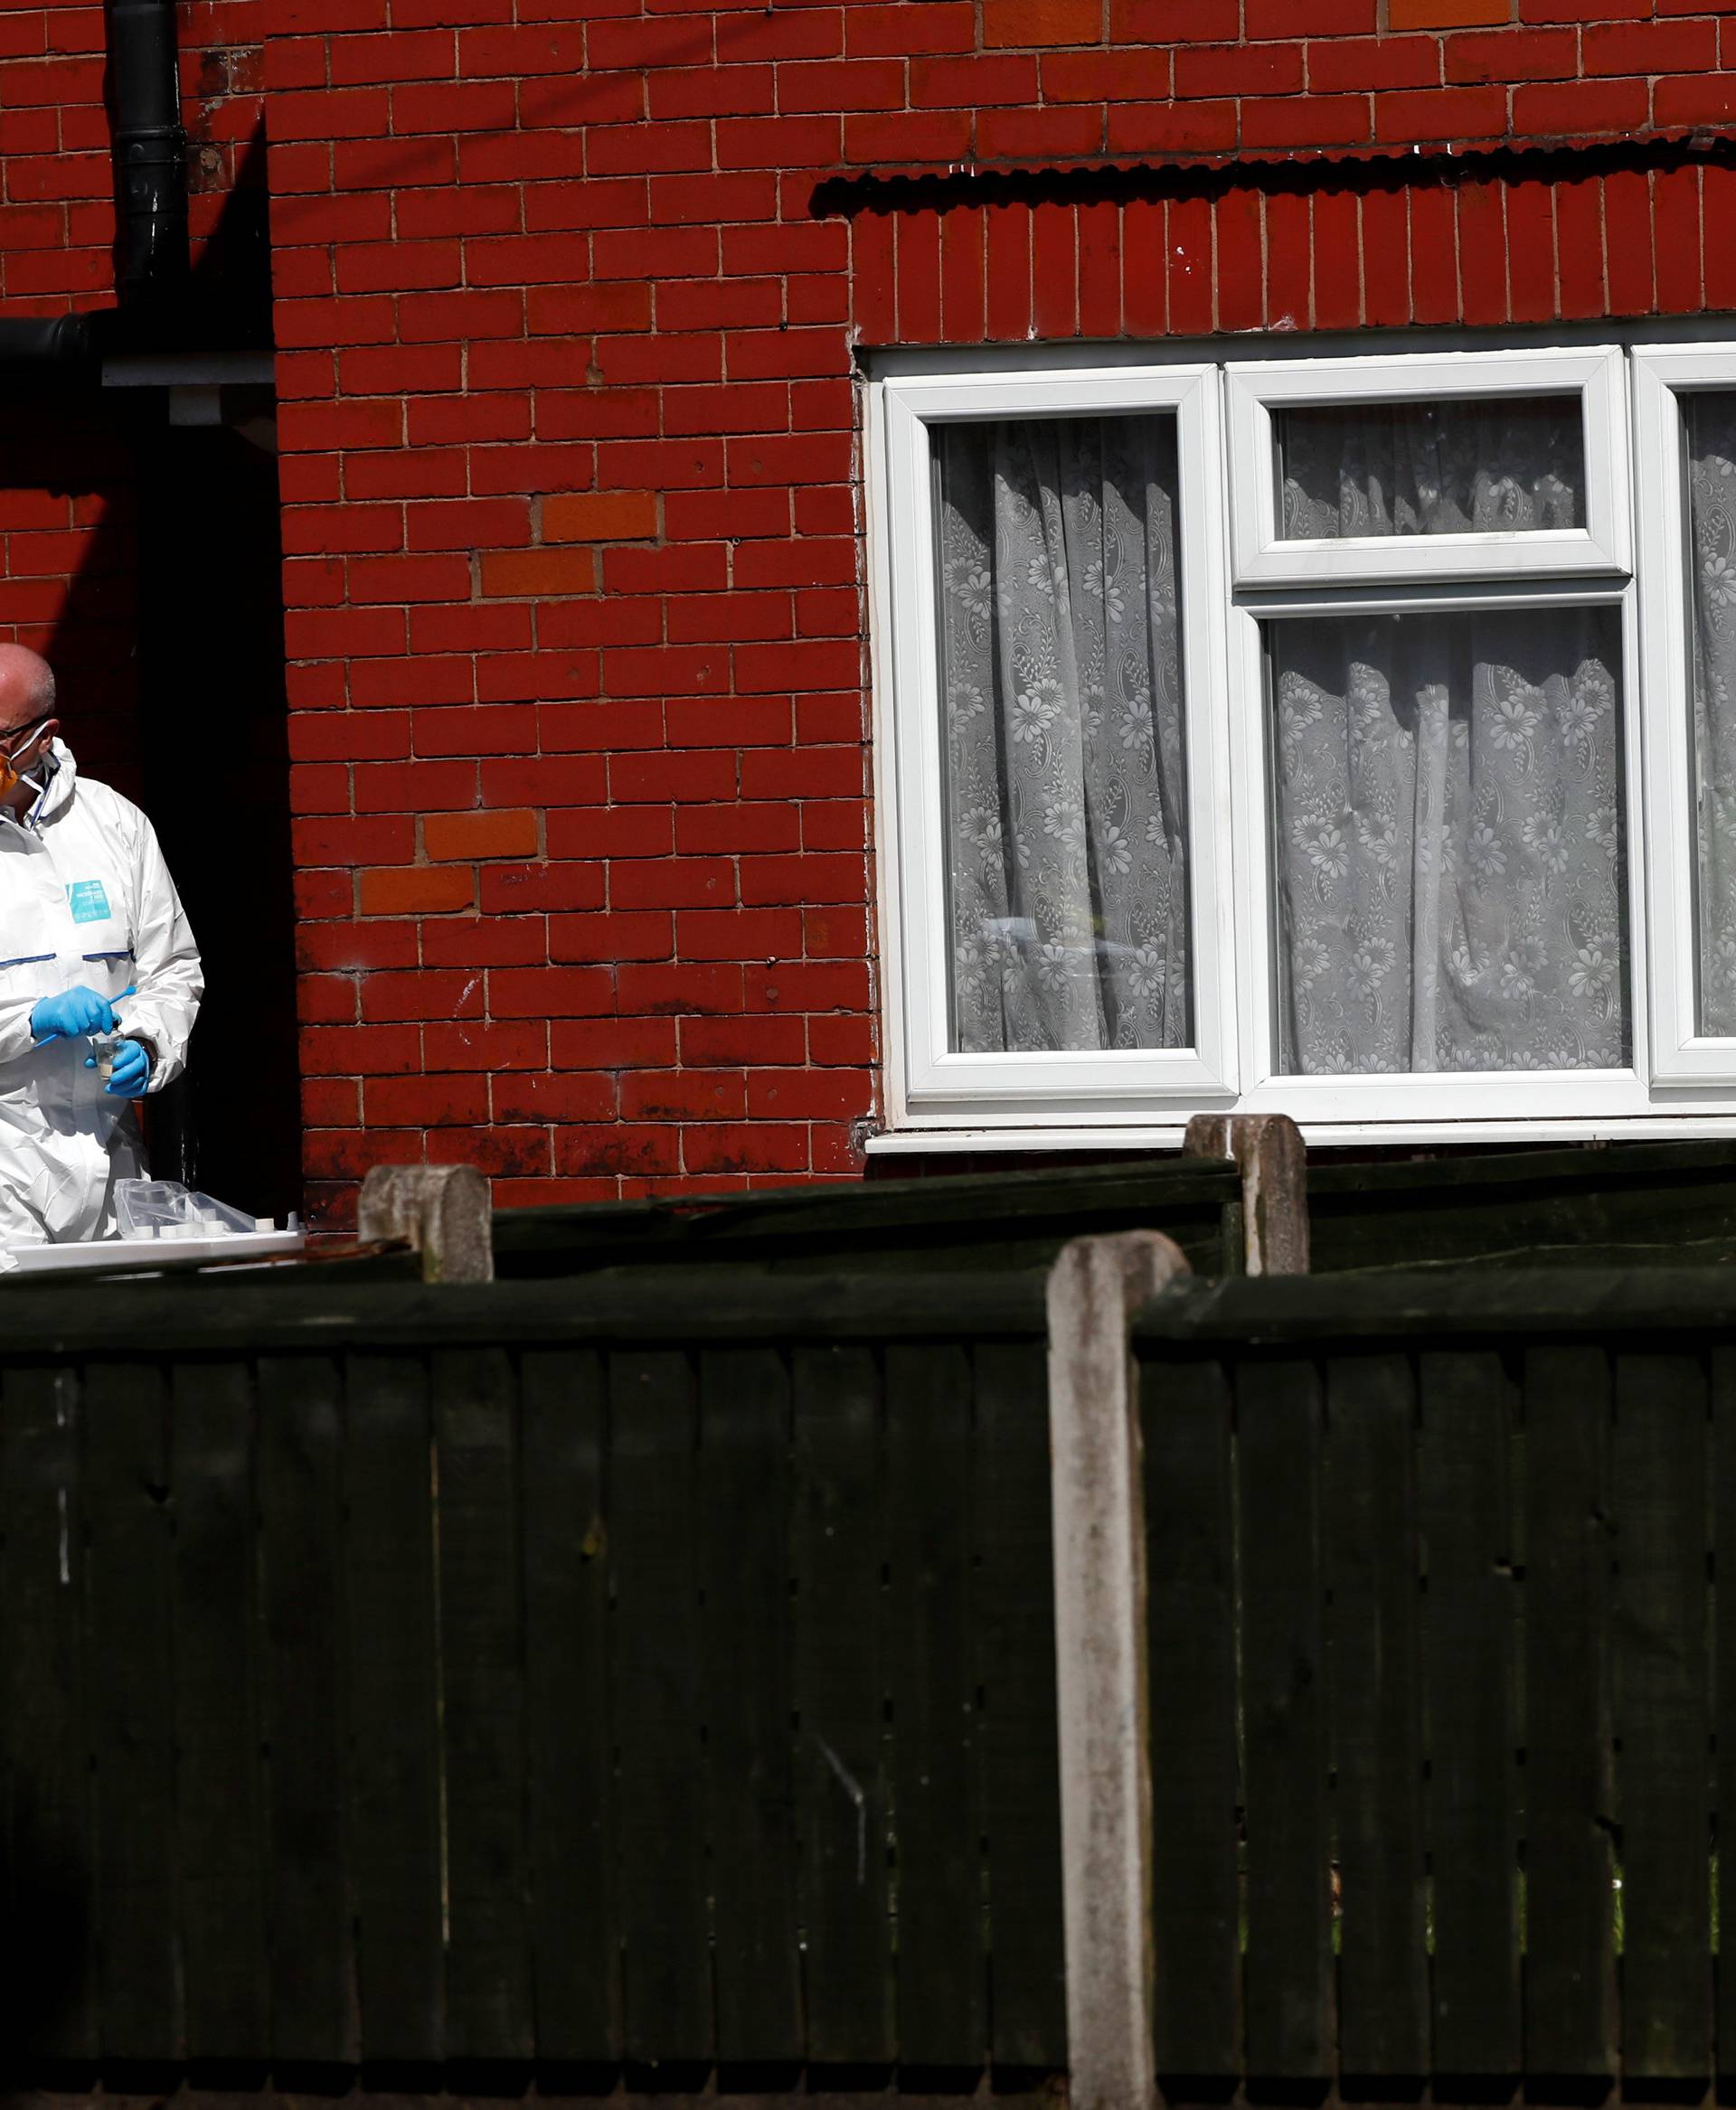 Police investigators work at residential property in south Manchester